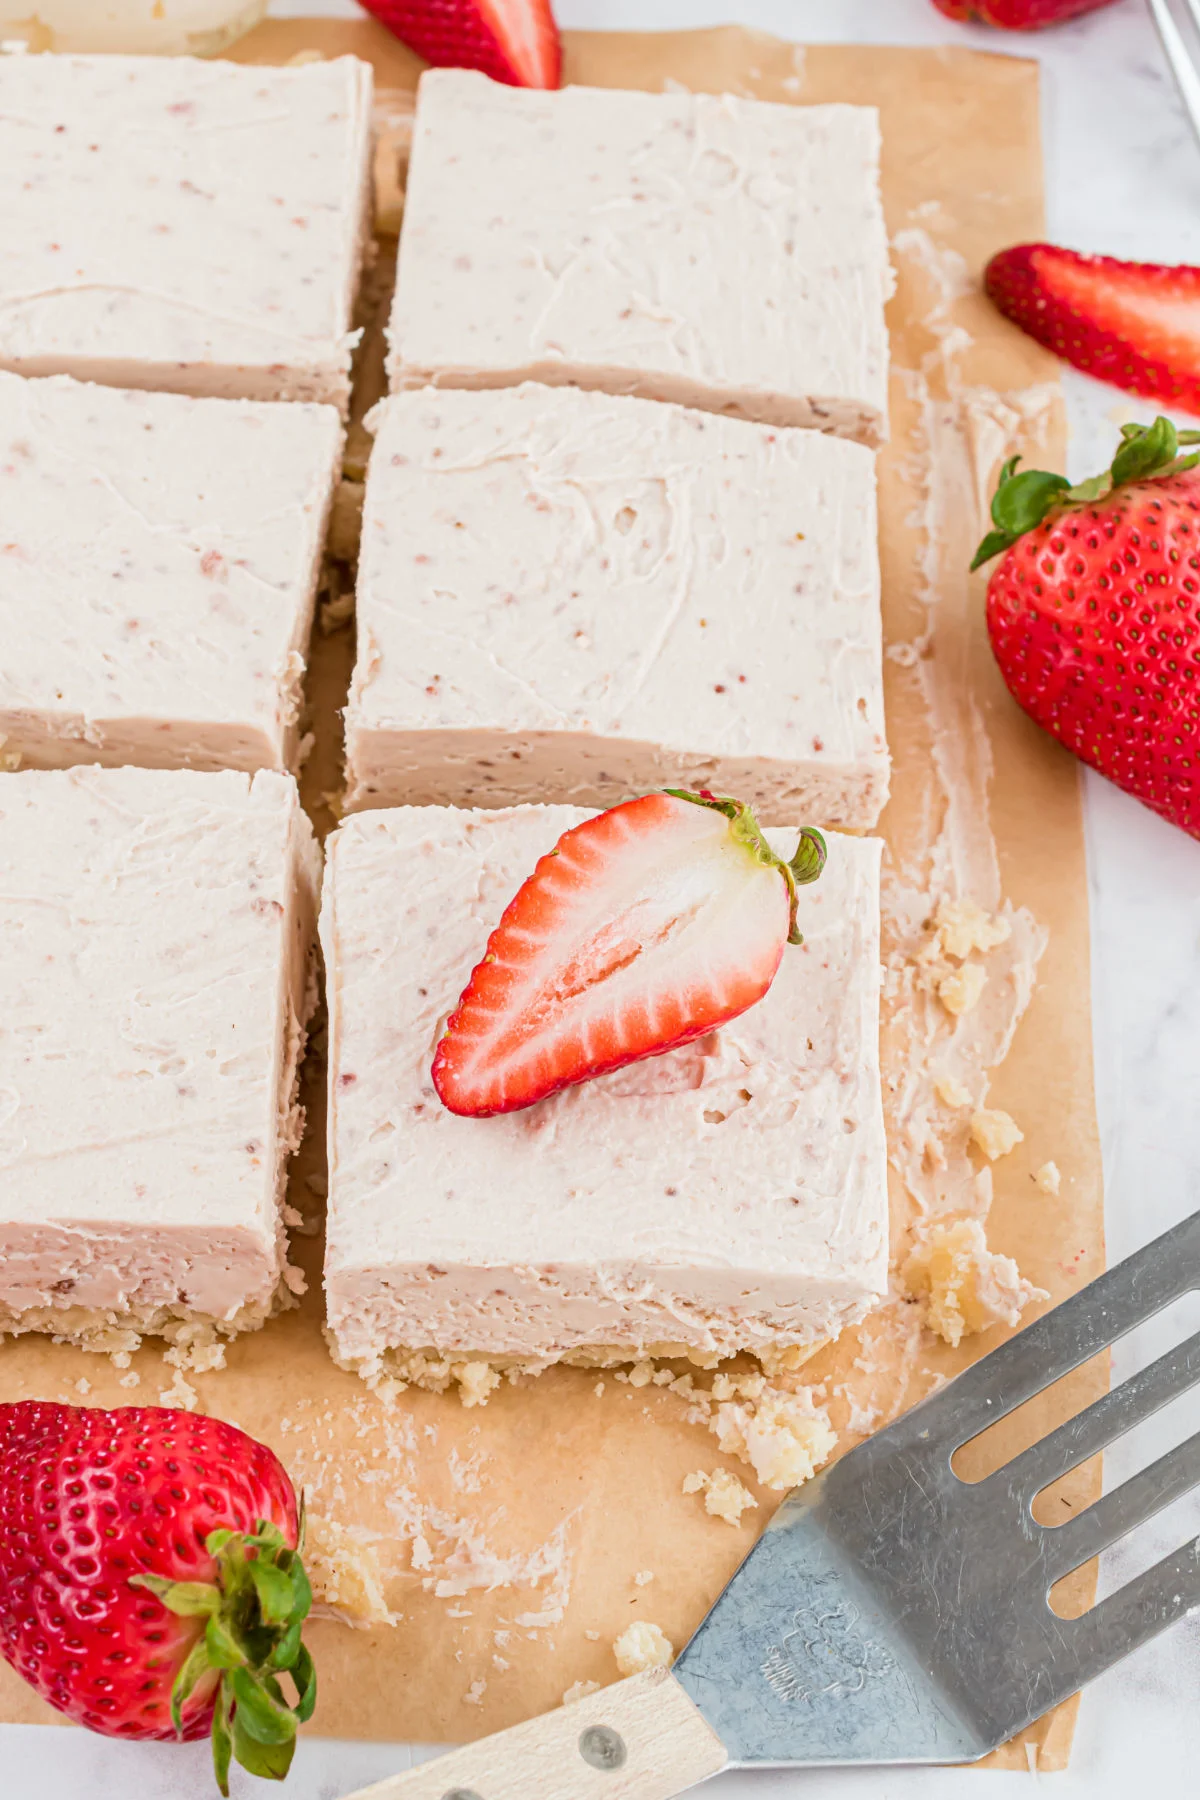 Strawberry cheesecake sliced into squares.